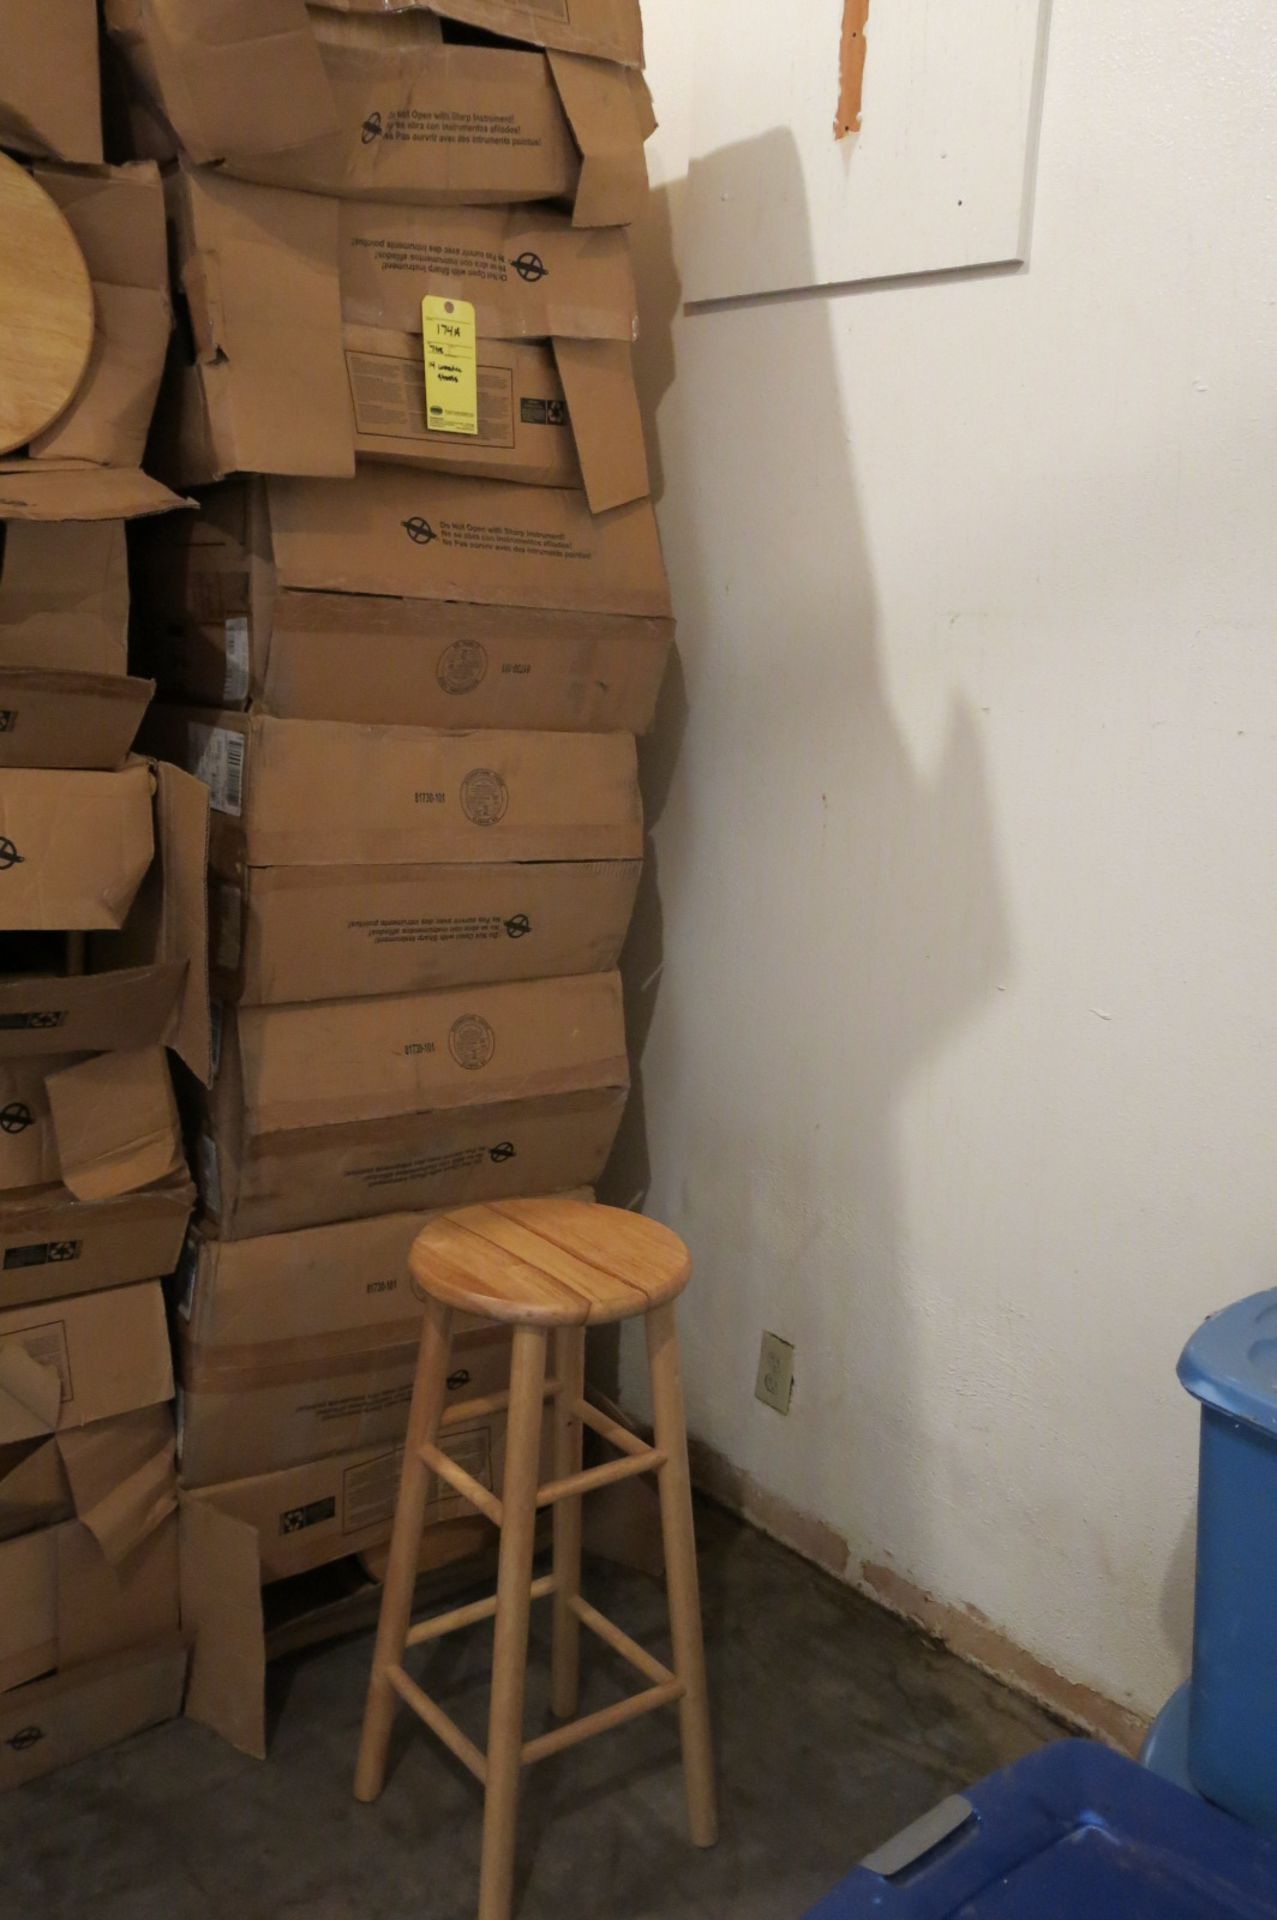 LOT OF STOOLS, wooden, (14)